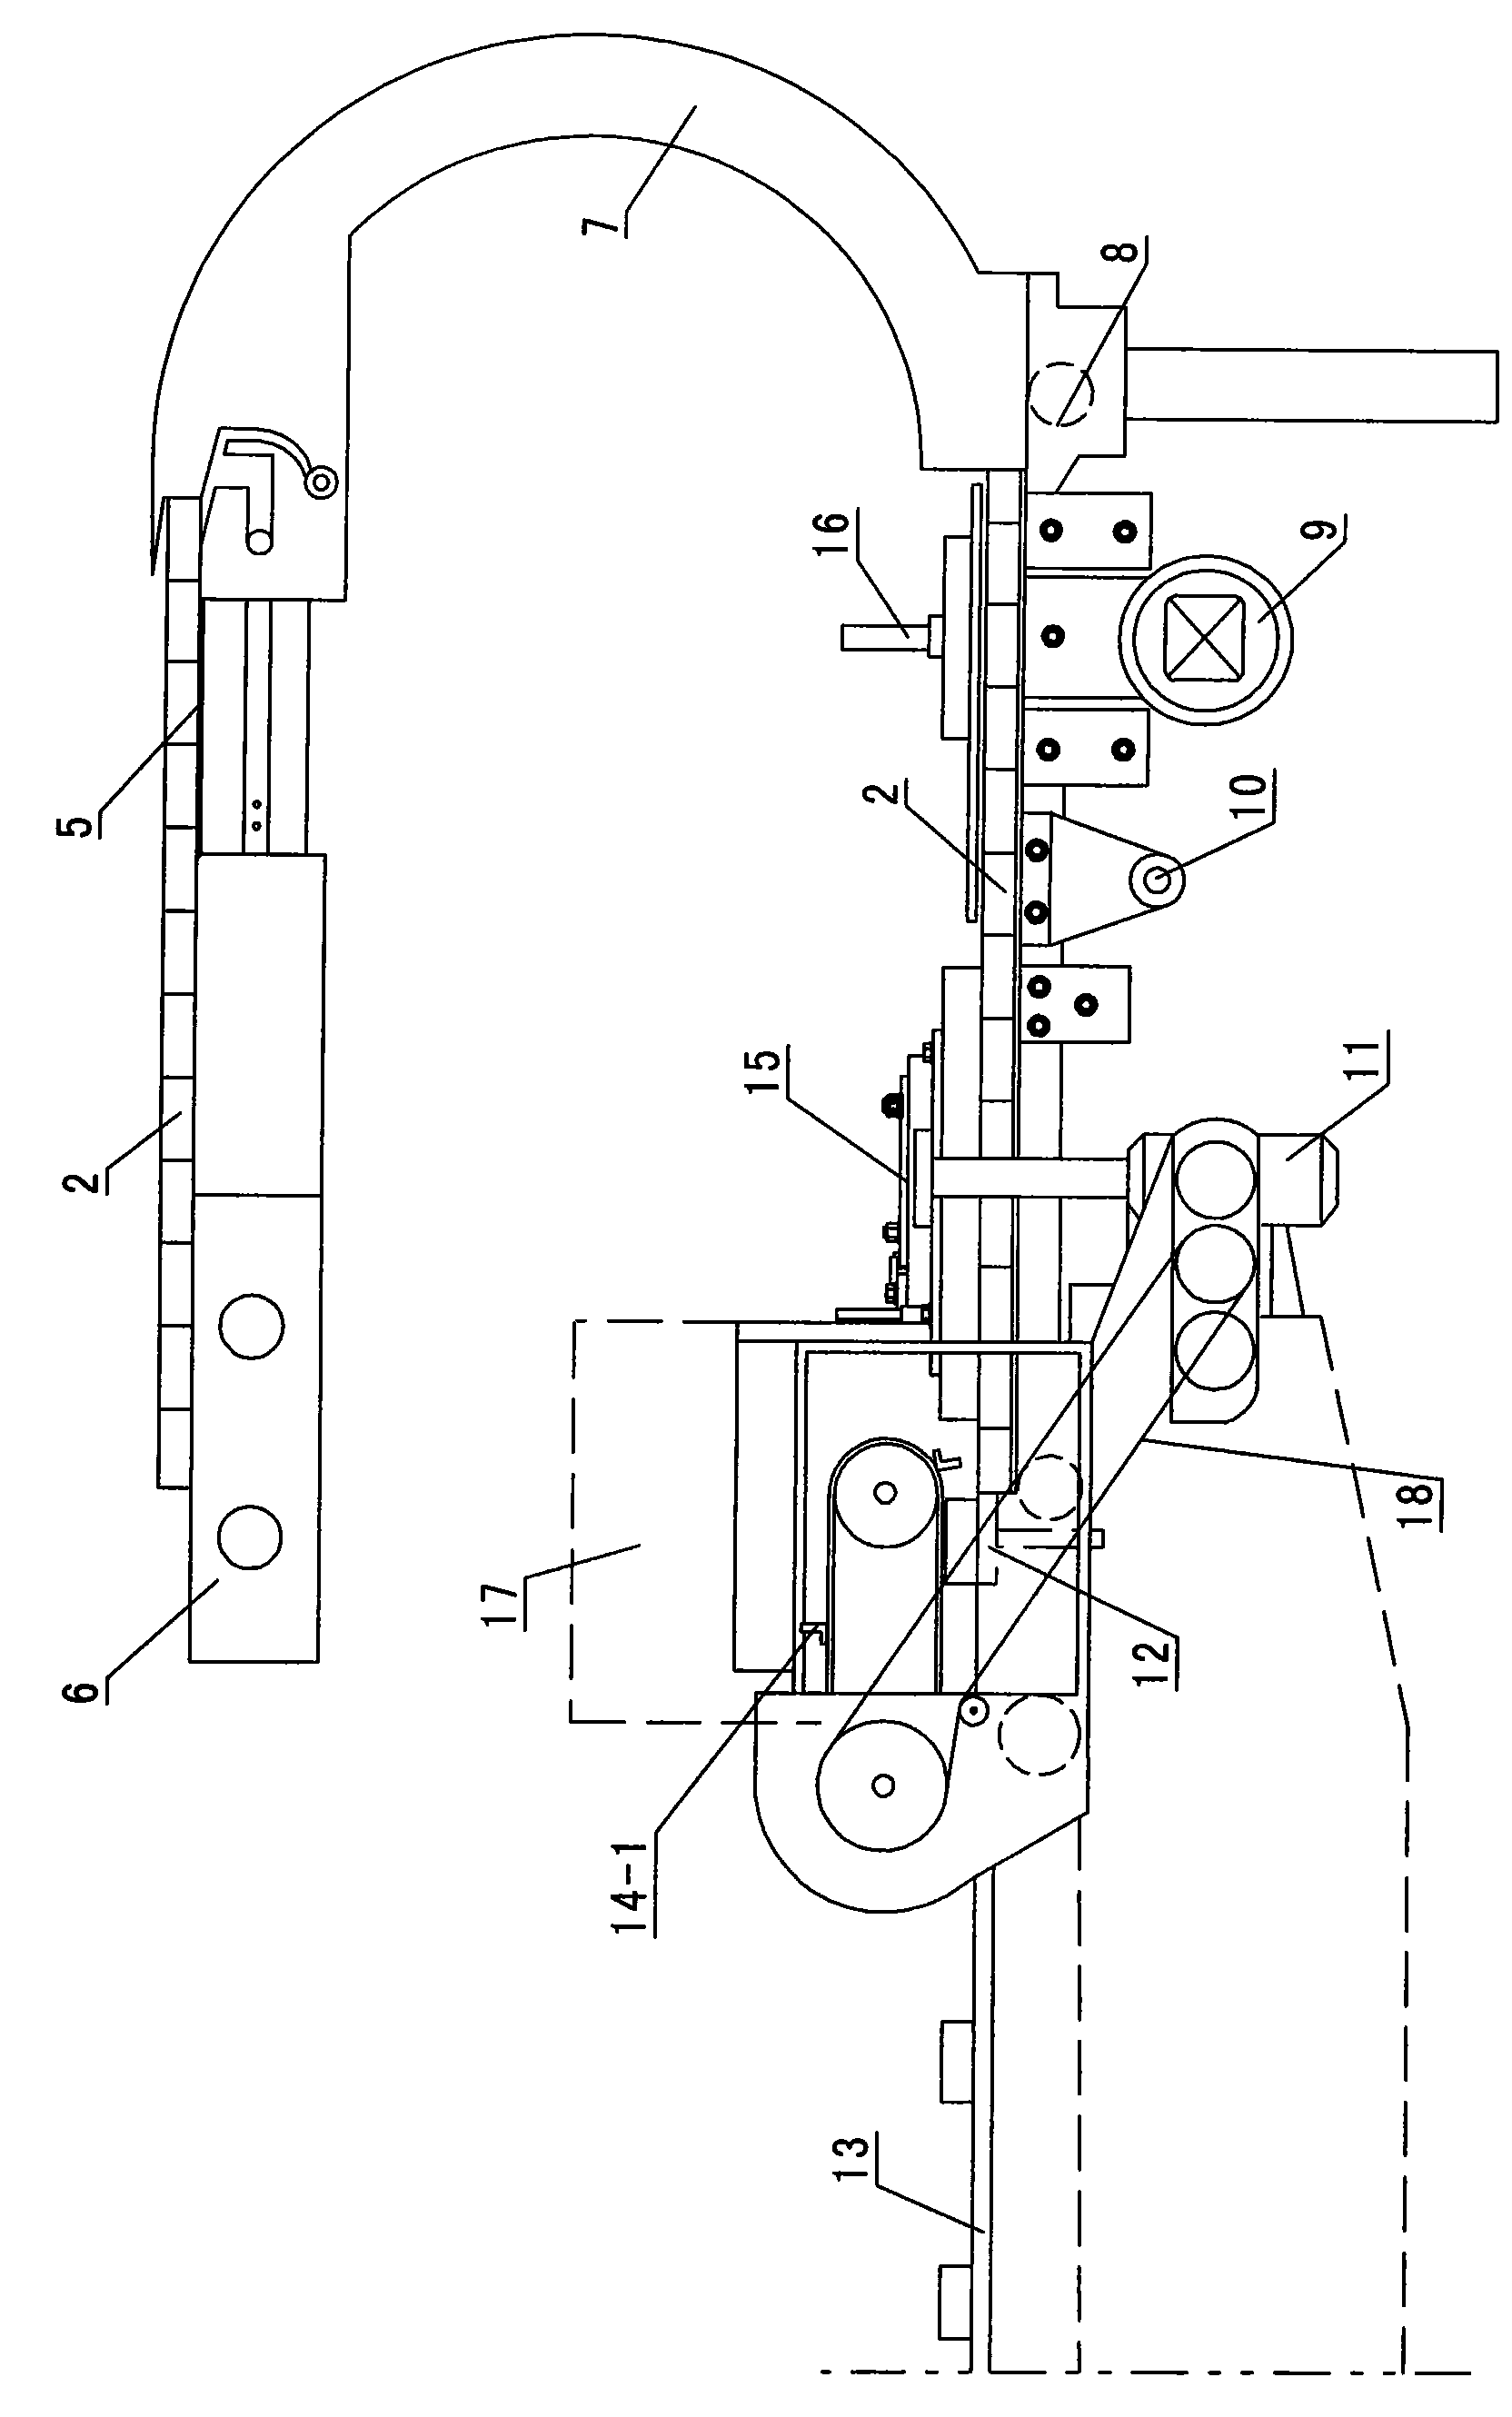 Auxiliary packing machine for cigarette packet transparent paper and cigarette packet conveying system thereof